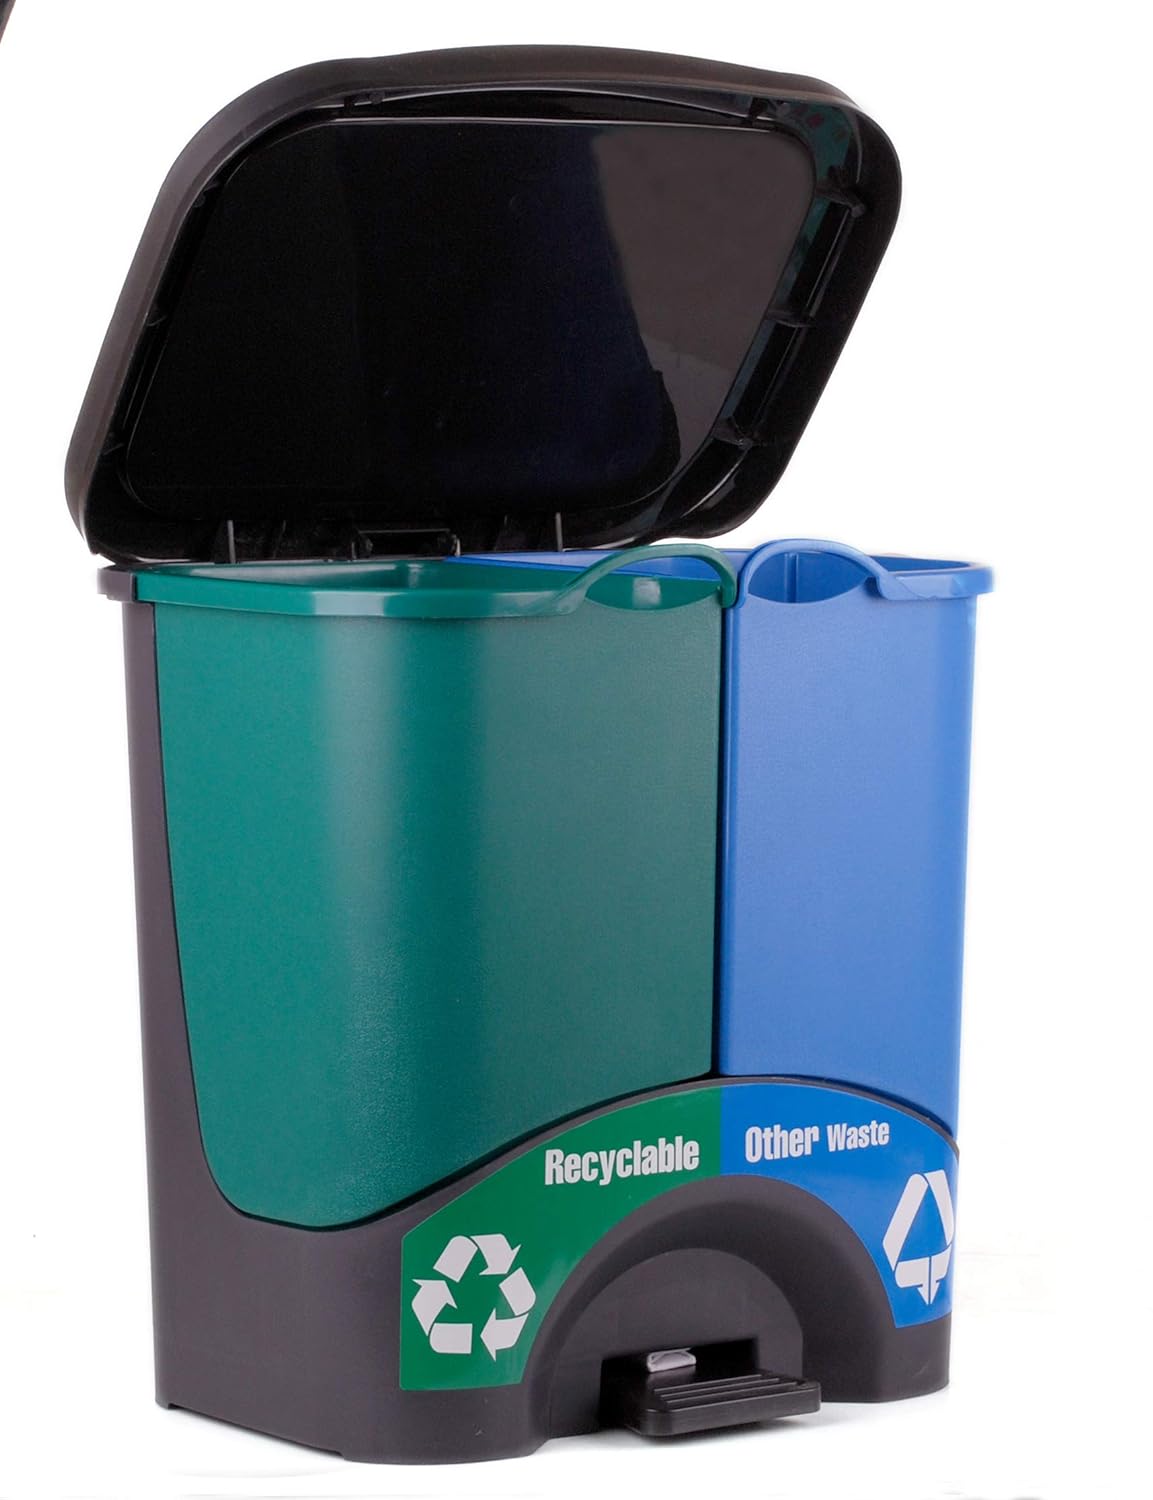 Mintra Home Trash Bins - 17.5inW x 17.5inH x 13inD - Double Bin - Green/Blue - Recycle, Trash, Can, Bin, Garbage, Plastic, Wastebasket, Adjustable, Removable, Home, Office, Durable